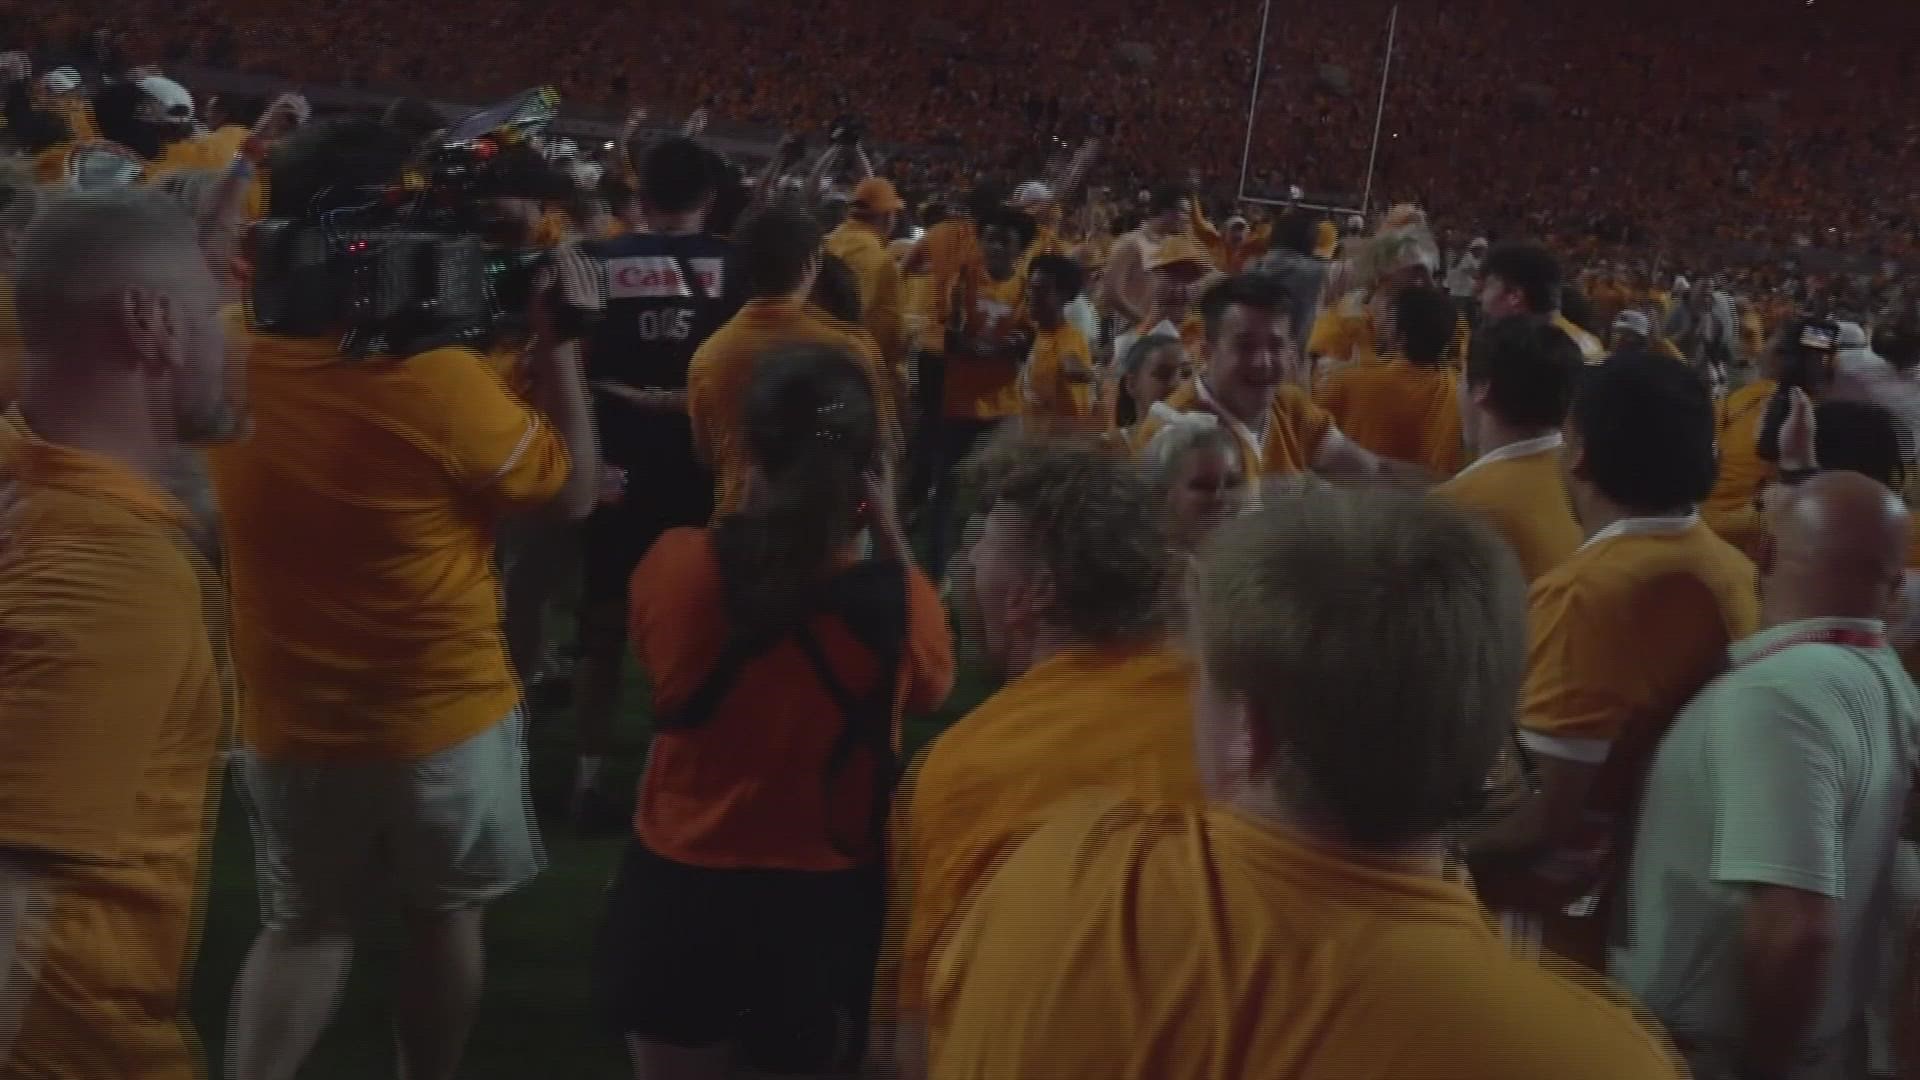 Vol fans were over the moon after a last-second field goal put Tennessee on top to win the game.